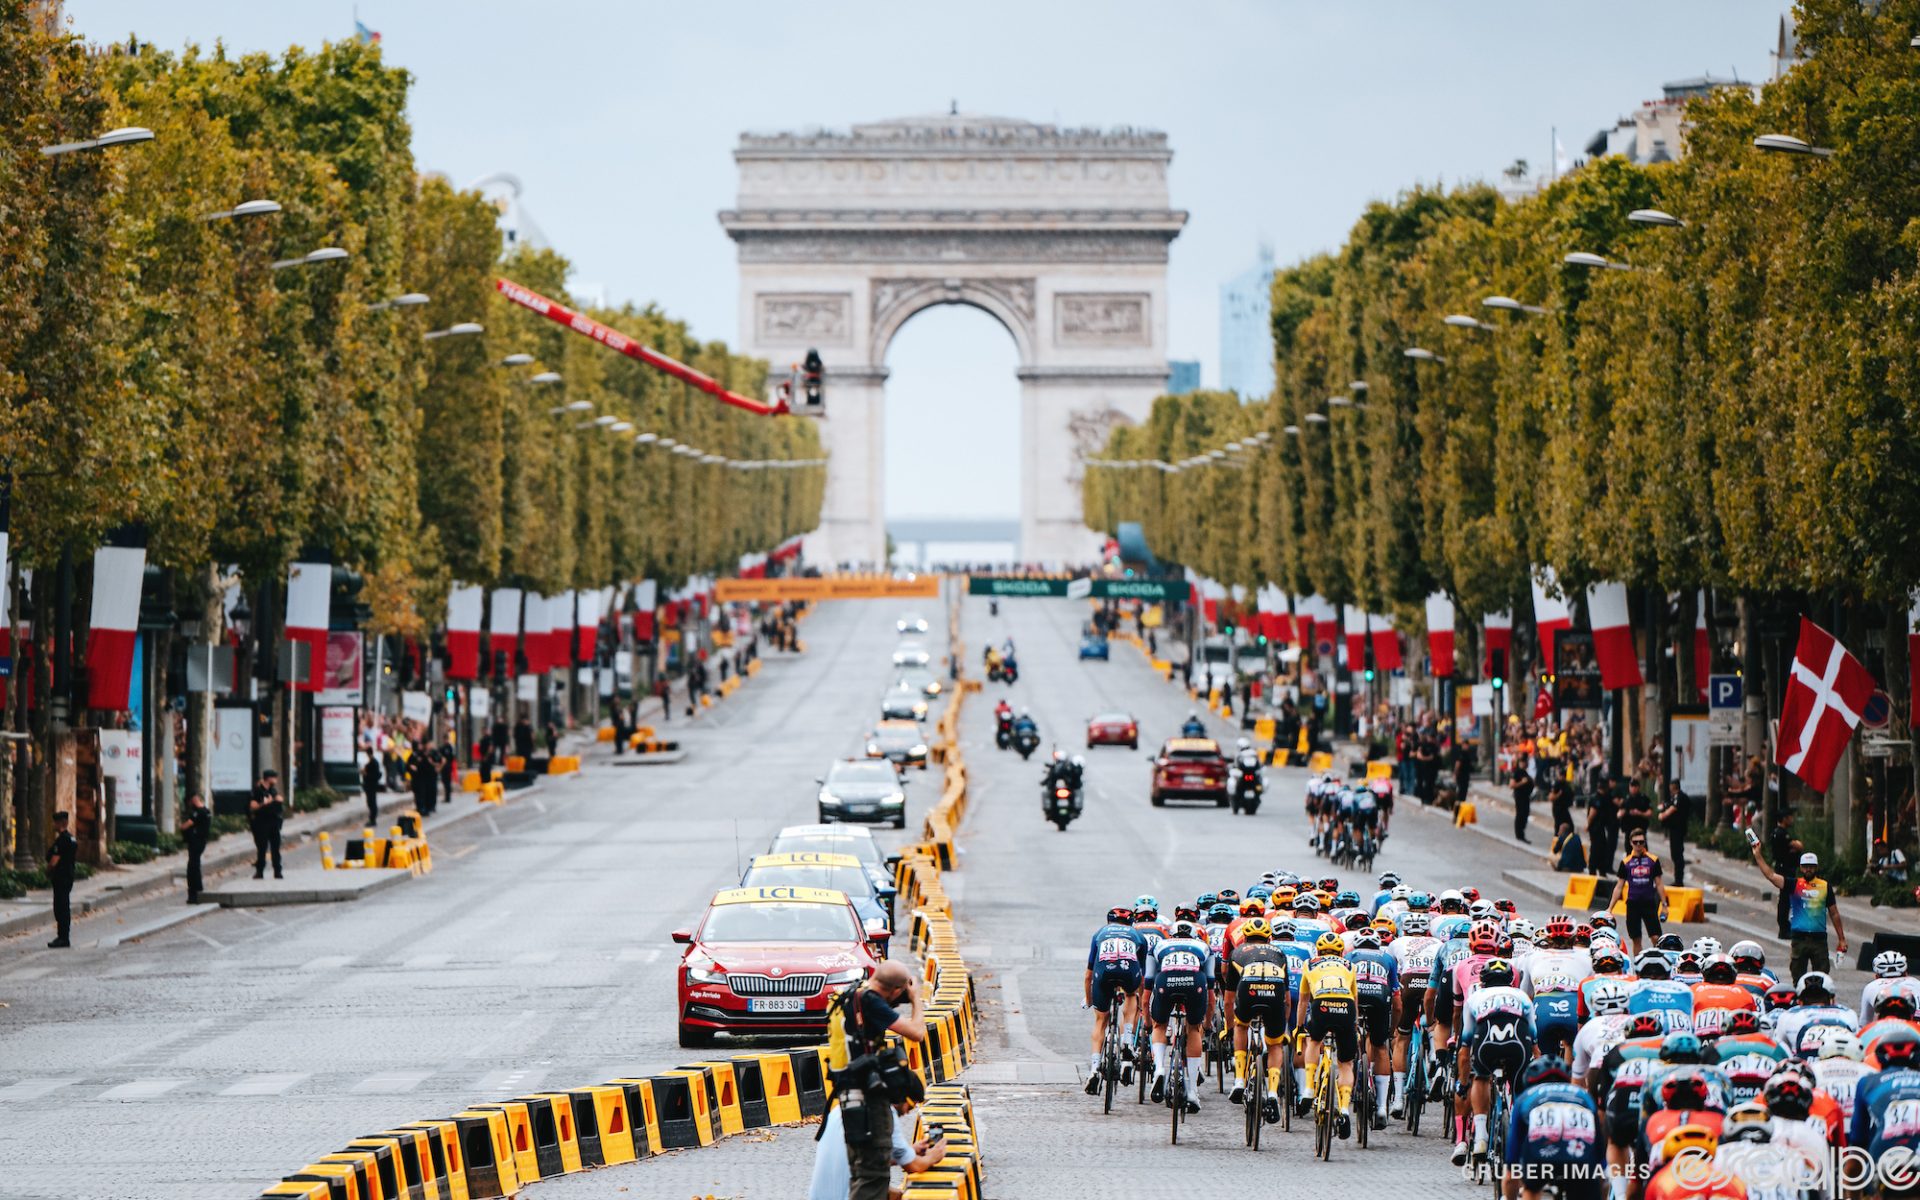 The pack races down the Champs-Elysées at the 2023 Tour de France. The road opens up in front of them, rising to the Arc de Triomphe.